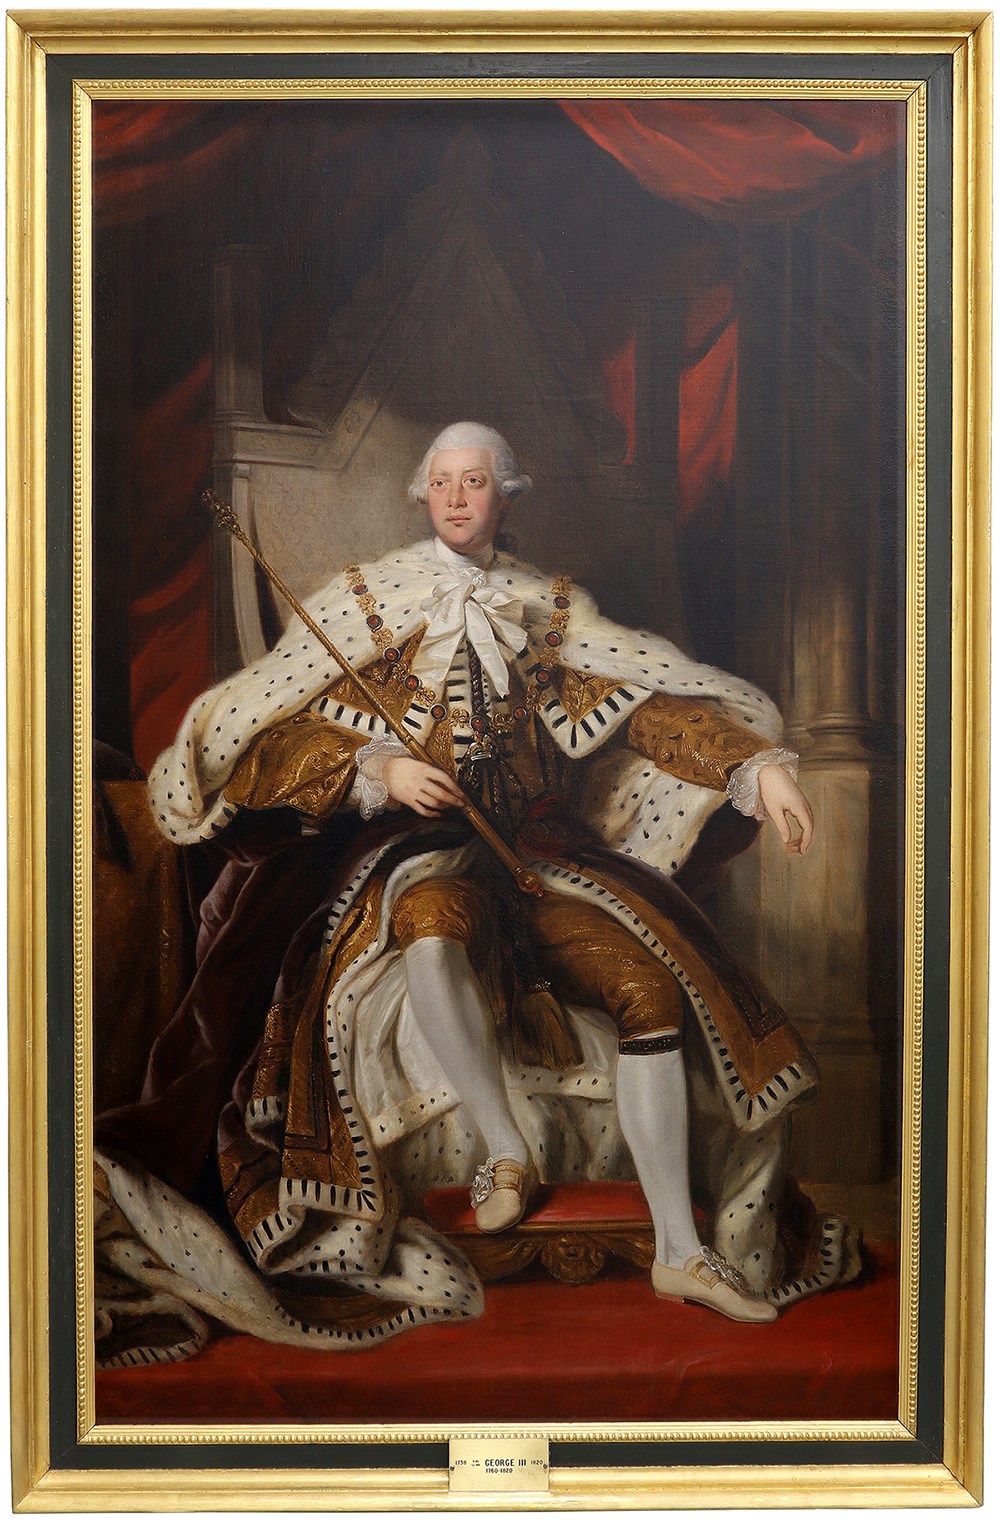 The Senate’s portrait of King George III, produced circa 1786 after a 1779 original by Sir Joshua Reynolds. (Oil on canvas, H: 266cm x W: 174cm, Senate Artwork and Heritage Collection. Photo credit: Legris Conservation)